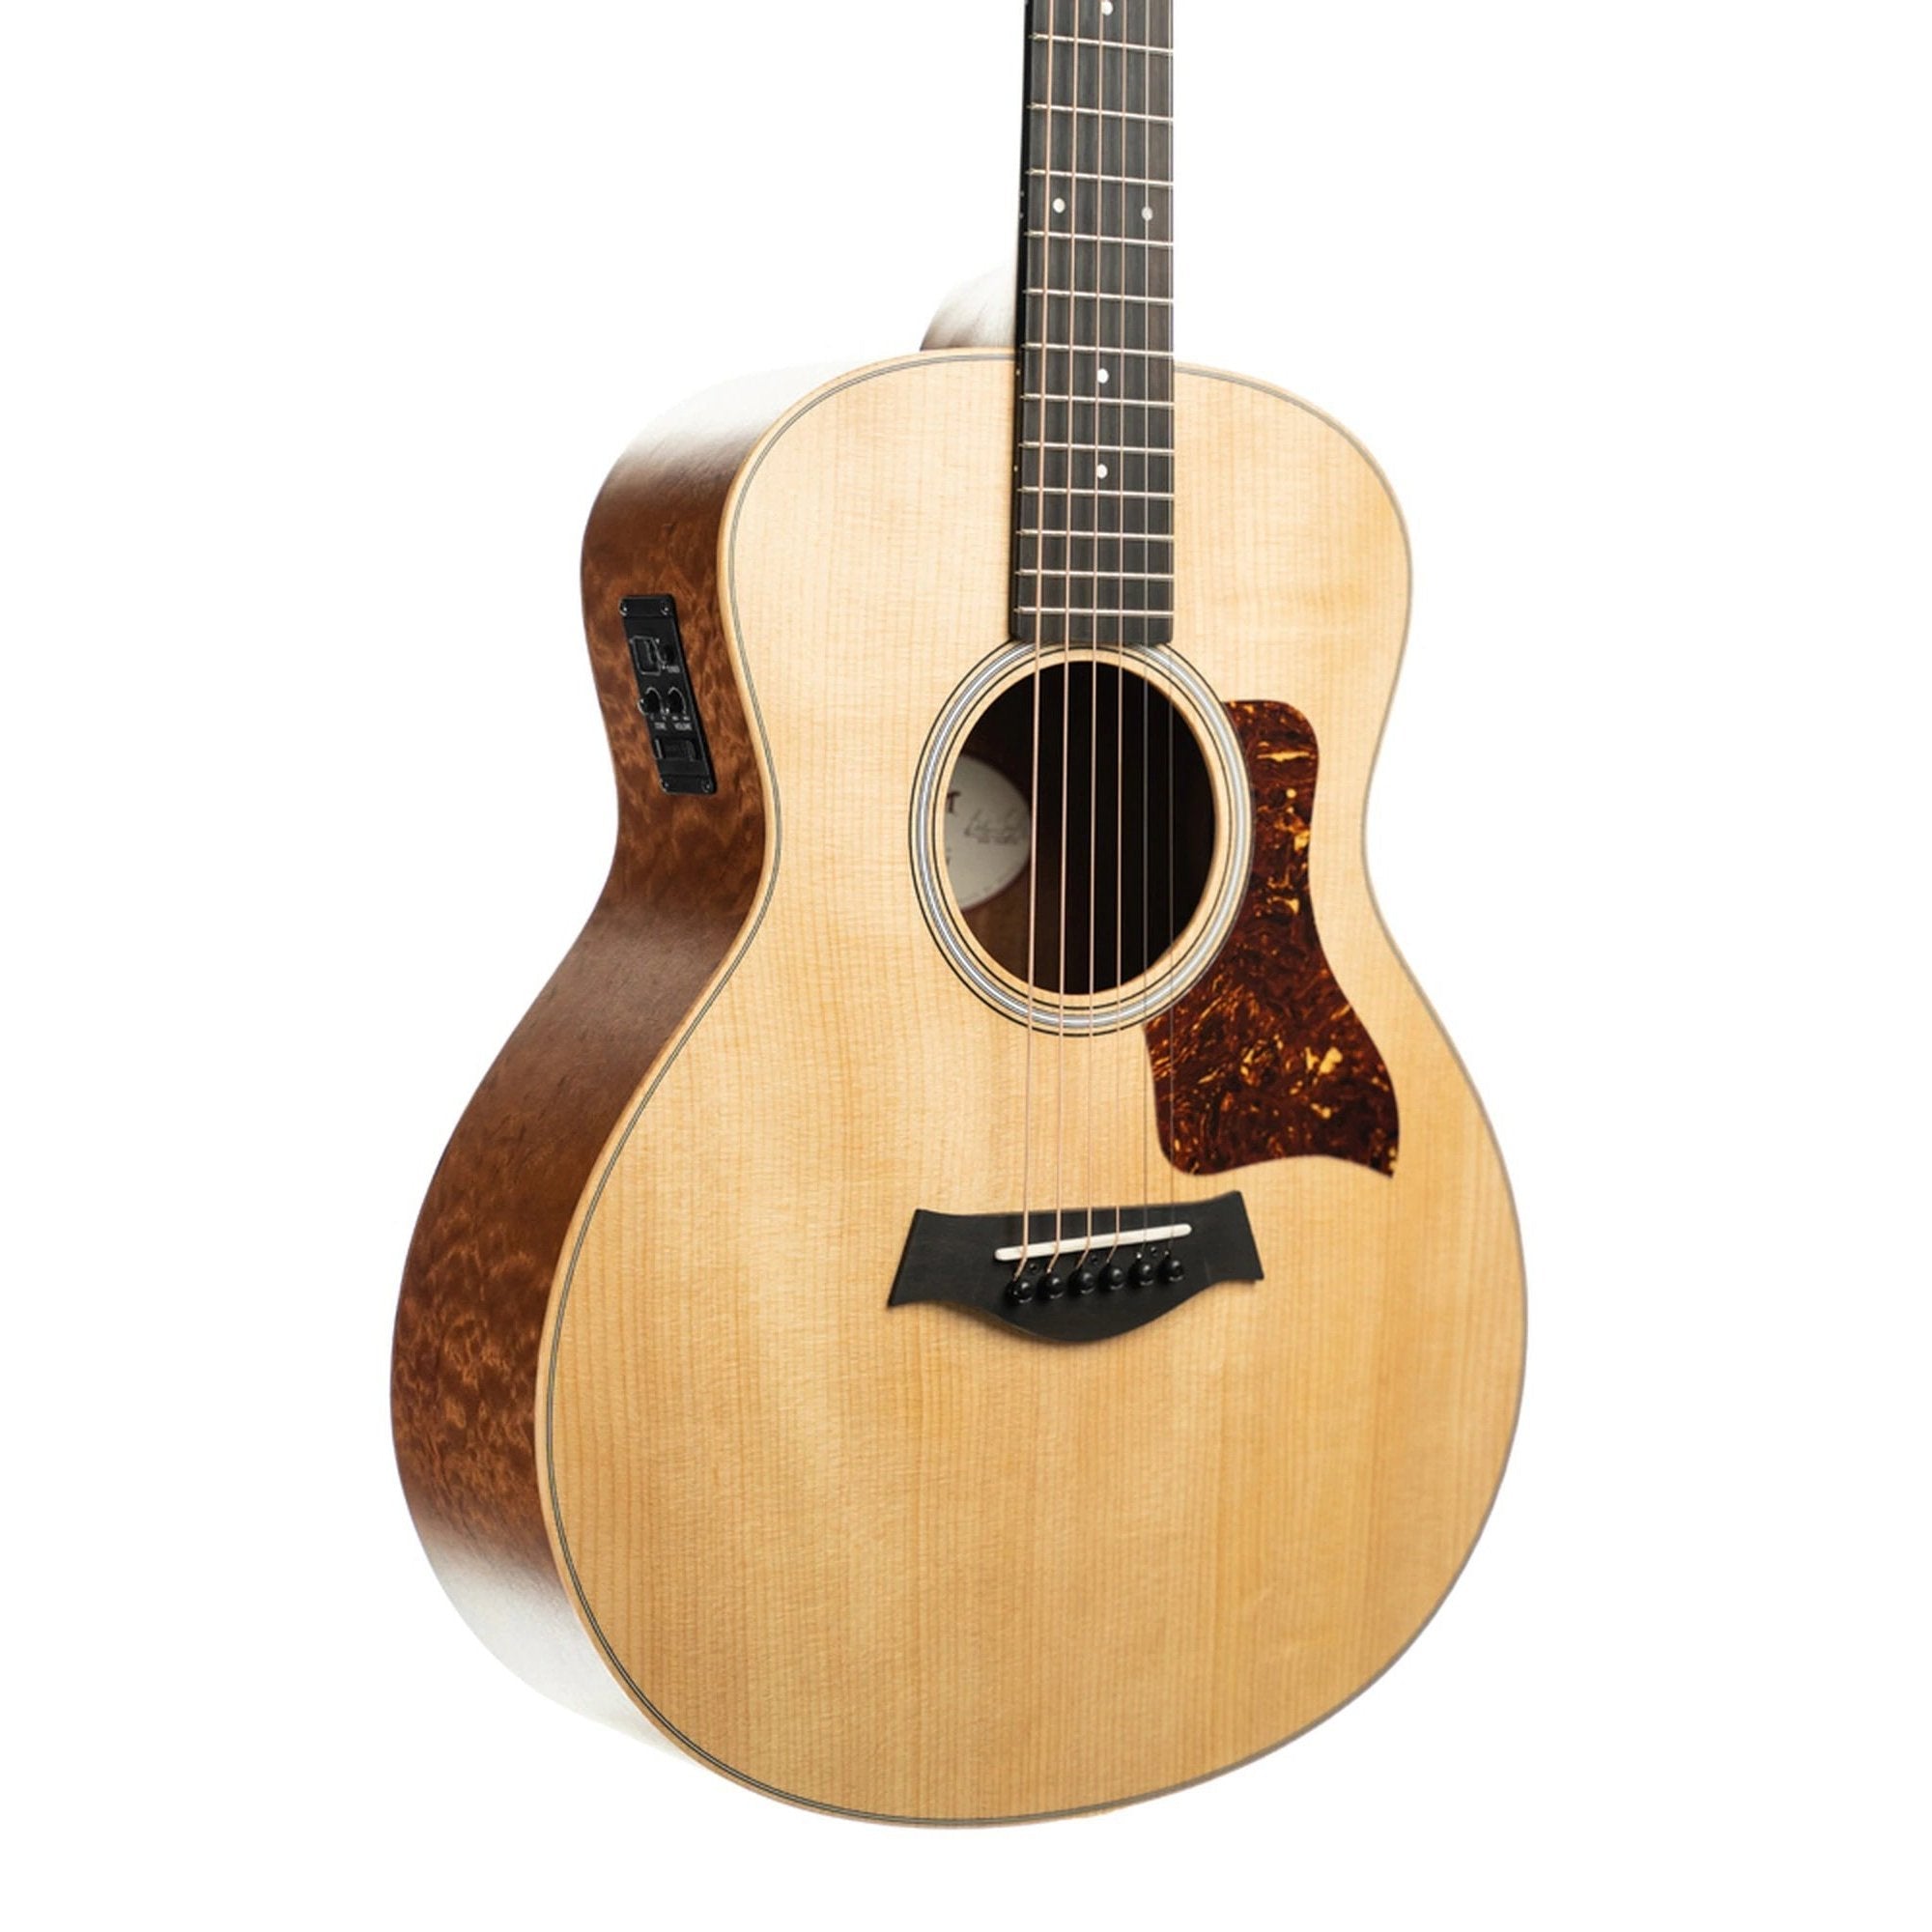 Taylor GS MINI-e Quilted Sapele Limited Edition Acoustic/Electric Guitar with Gig Bag (Discontinued)-Music World Academy